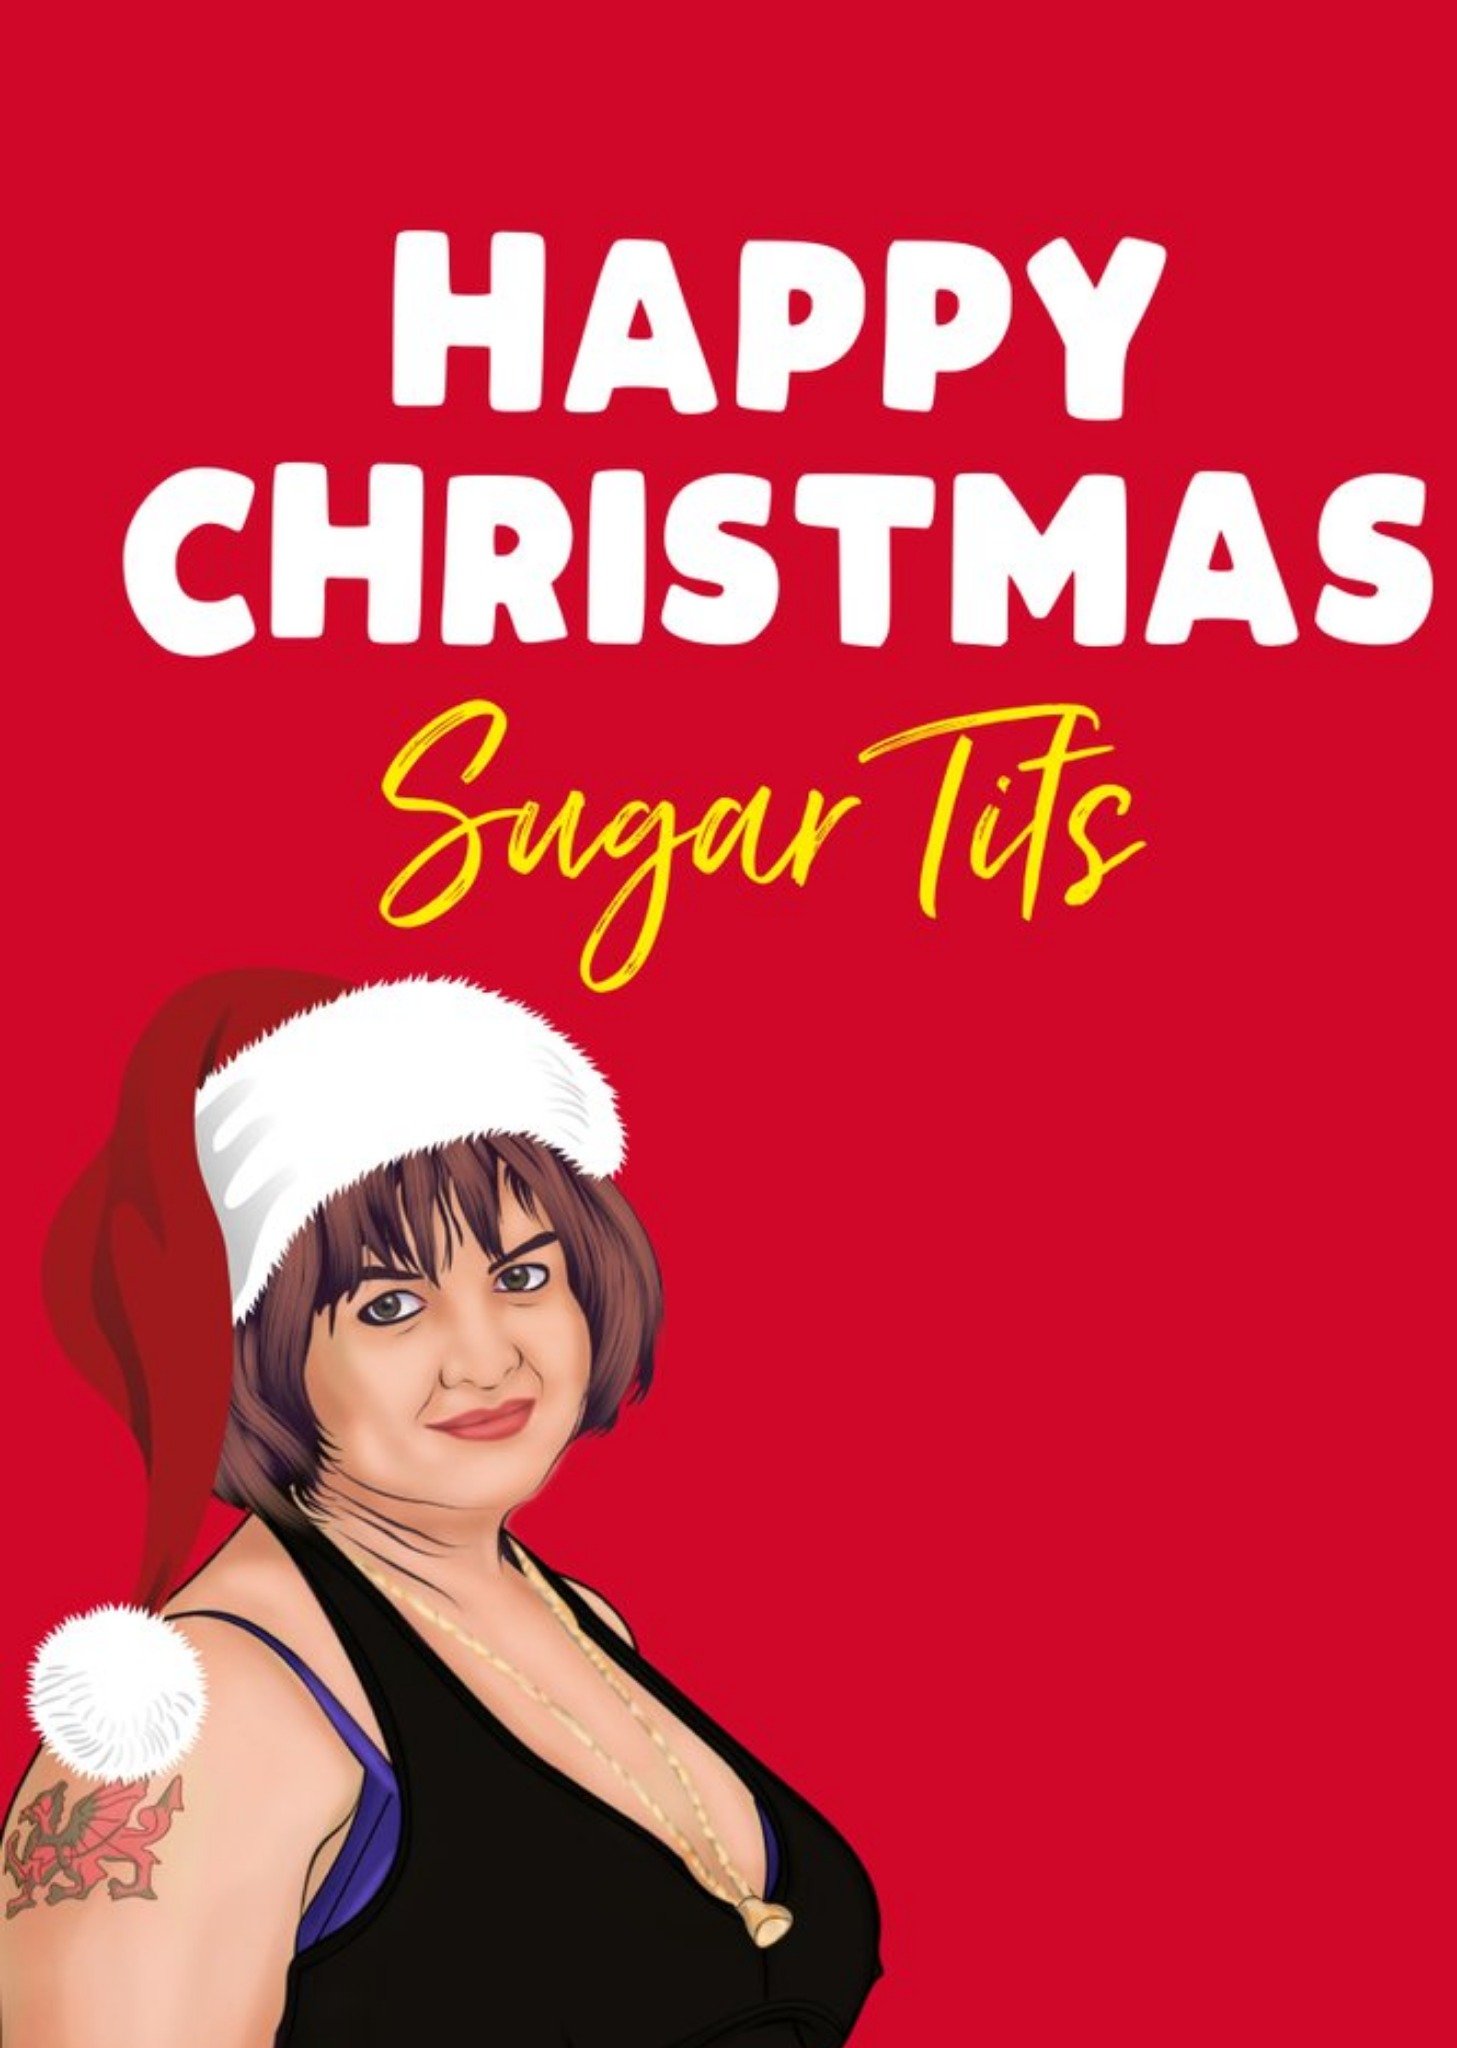 Filthy Sentiments Happy Christmas Sugar Tits Funny Christmas Card, Large